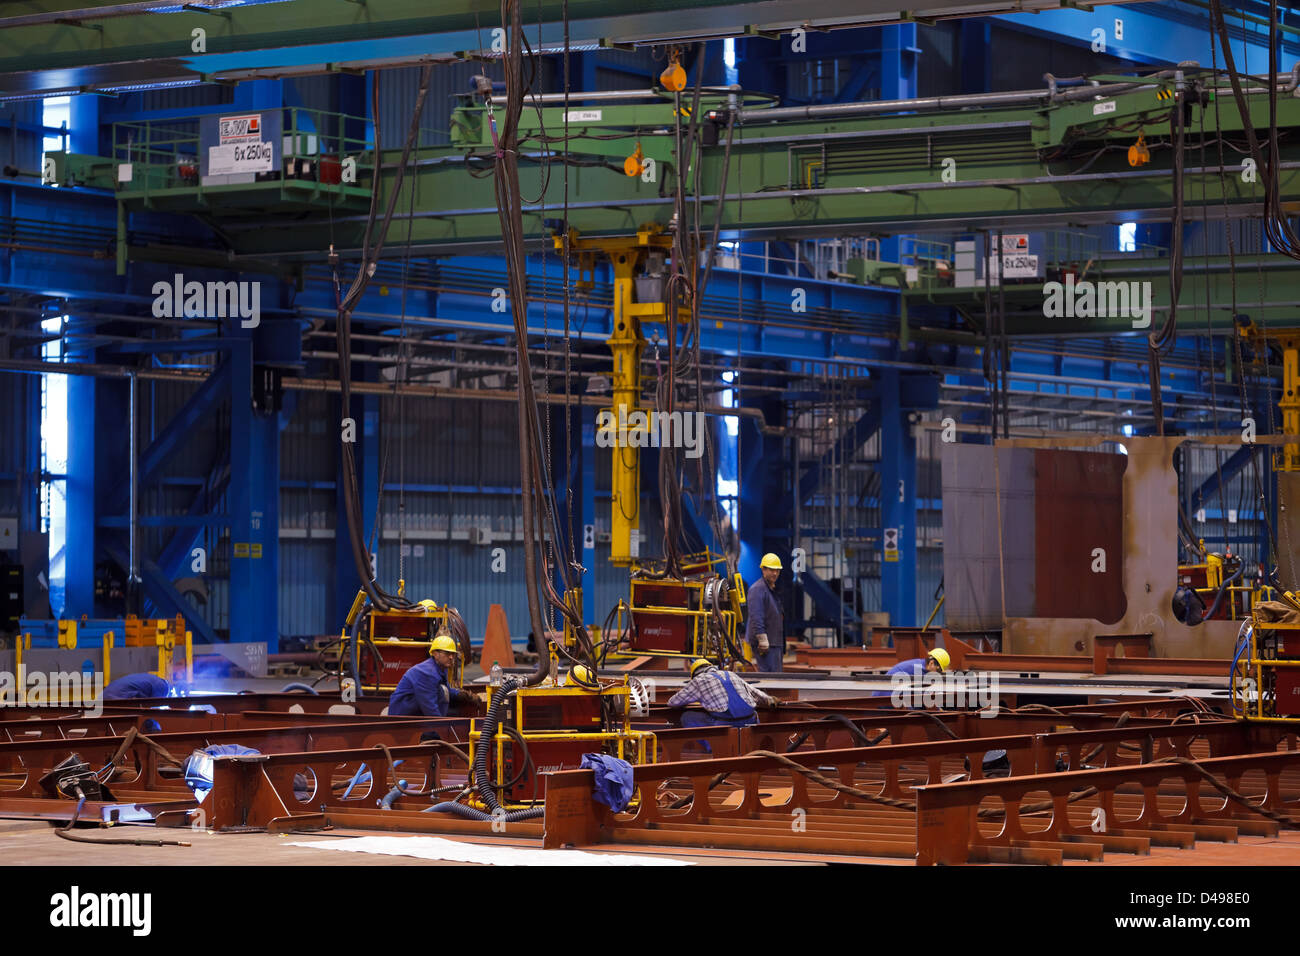 Papenburg, Germany, Meyer Werft GmbH, an employee of the Meyer Werft shipyard in the halls Stock Photo